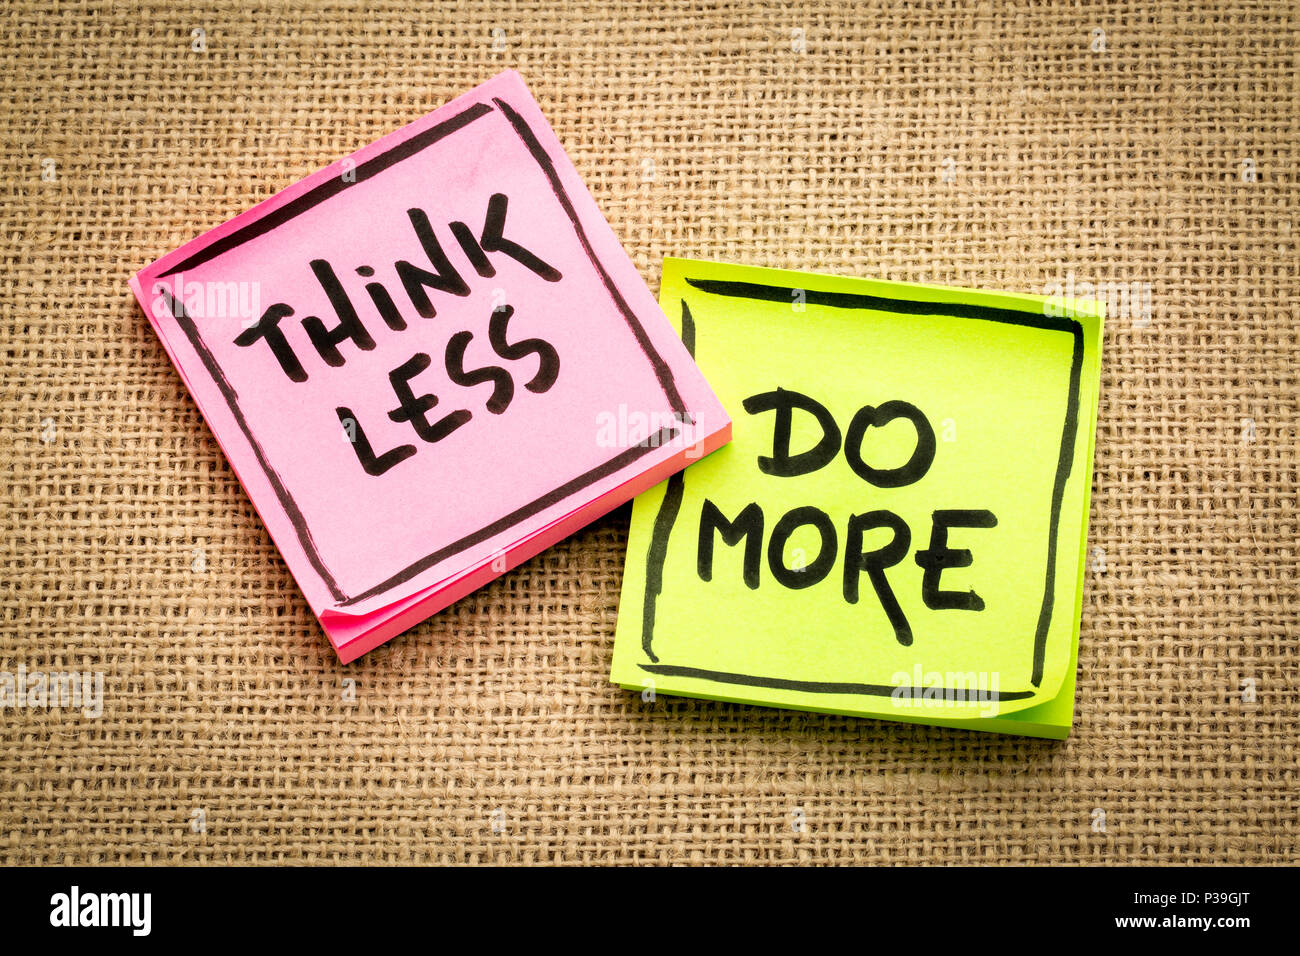 think less, do more reminder - inspirational handwriting on sticky notes against burlap canvas Stock Photo